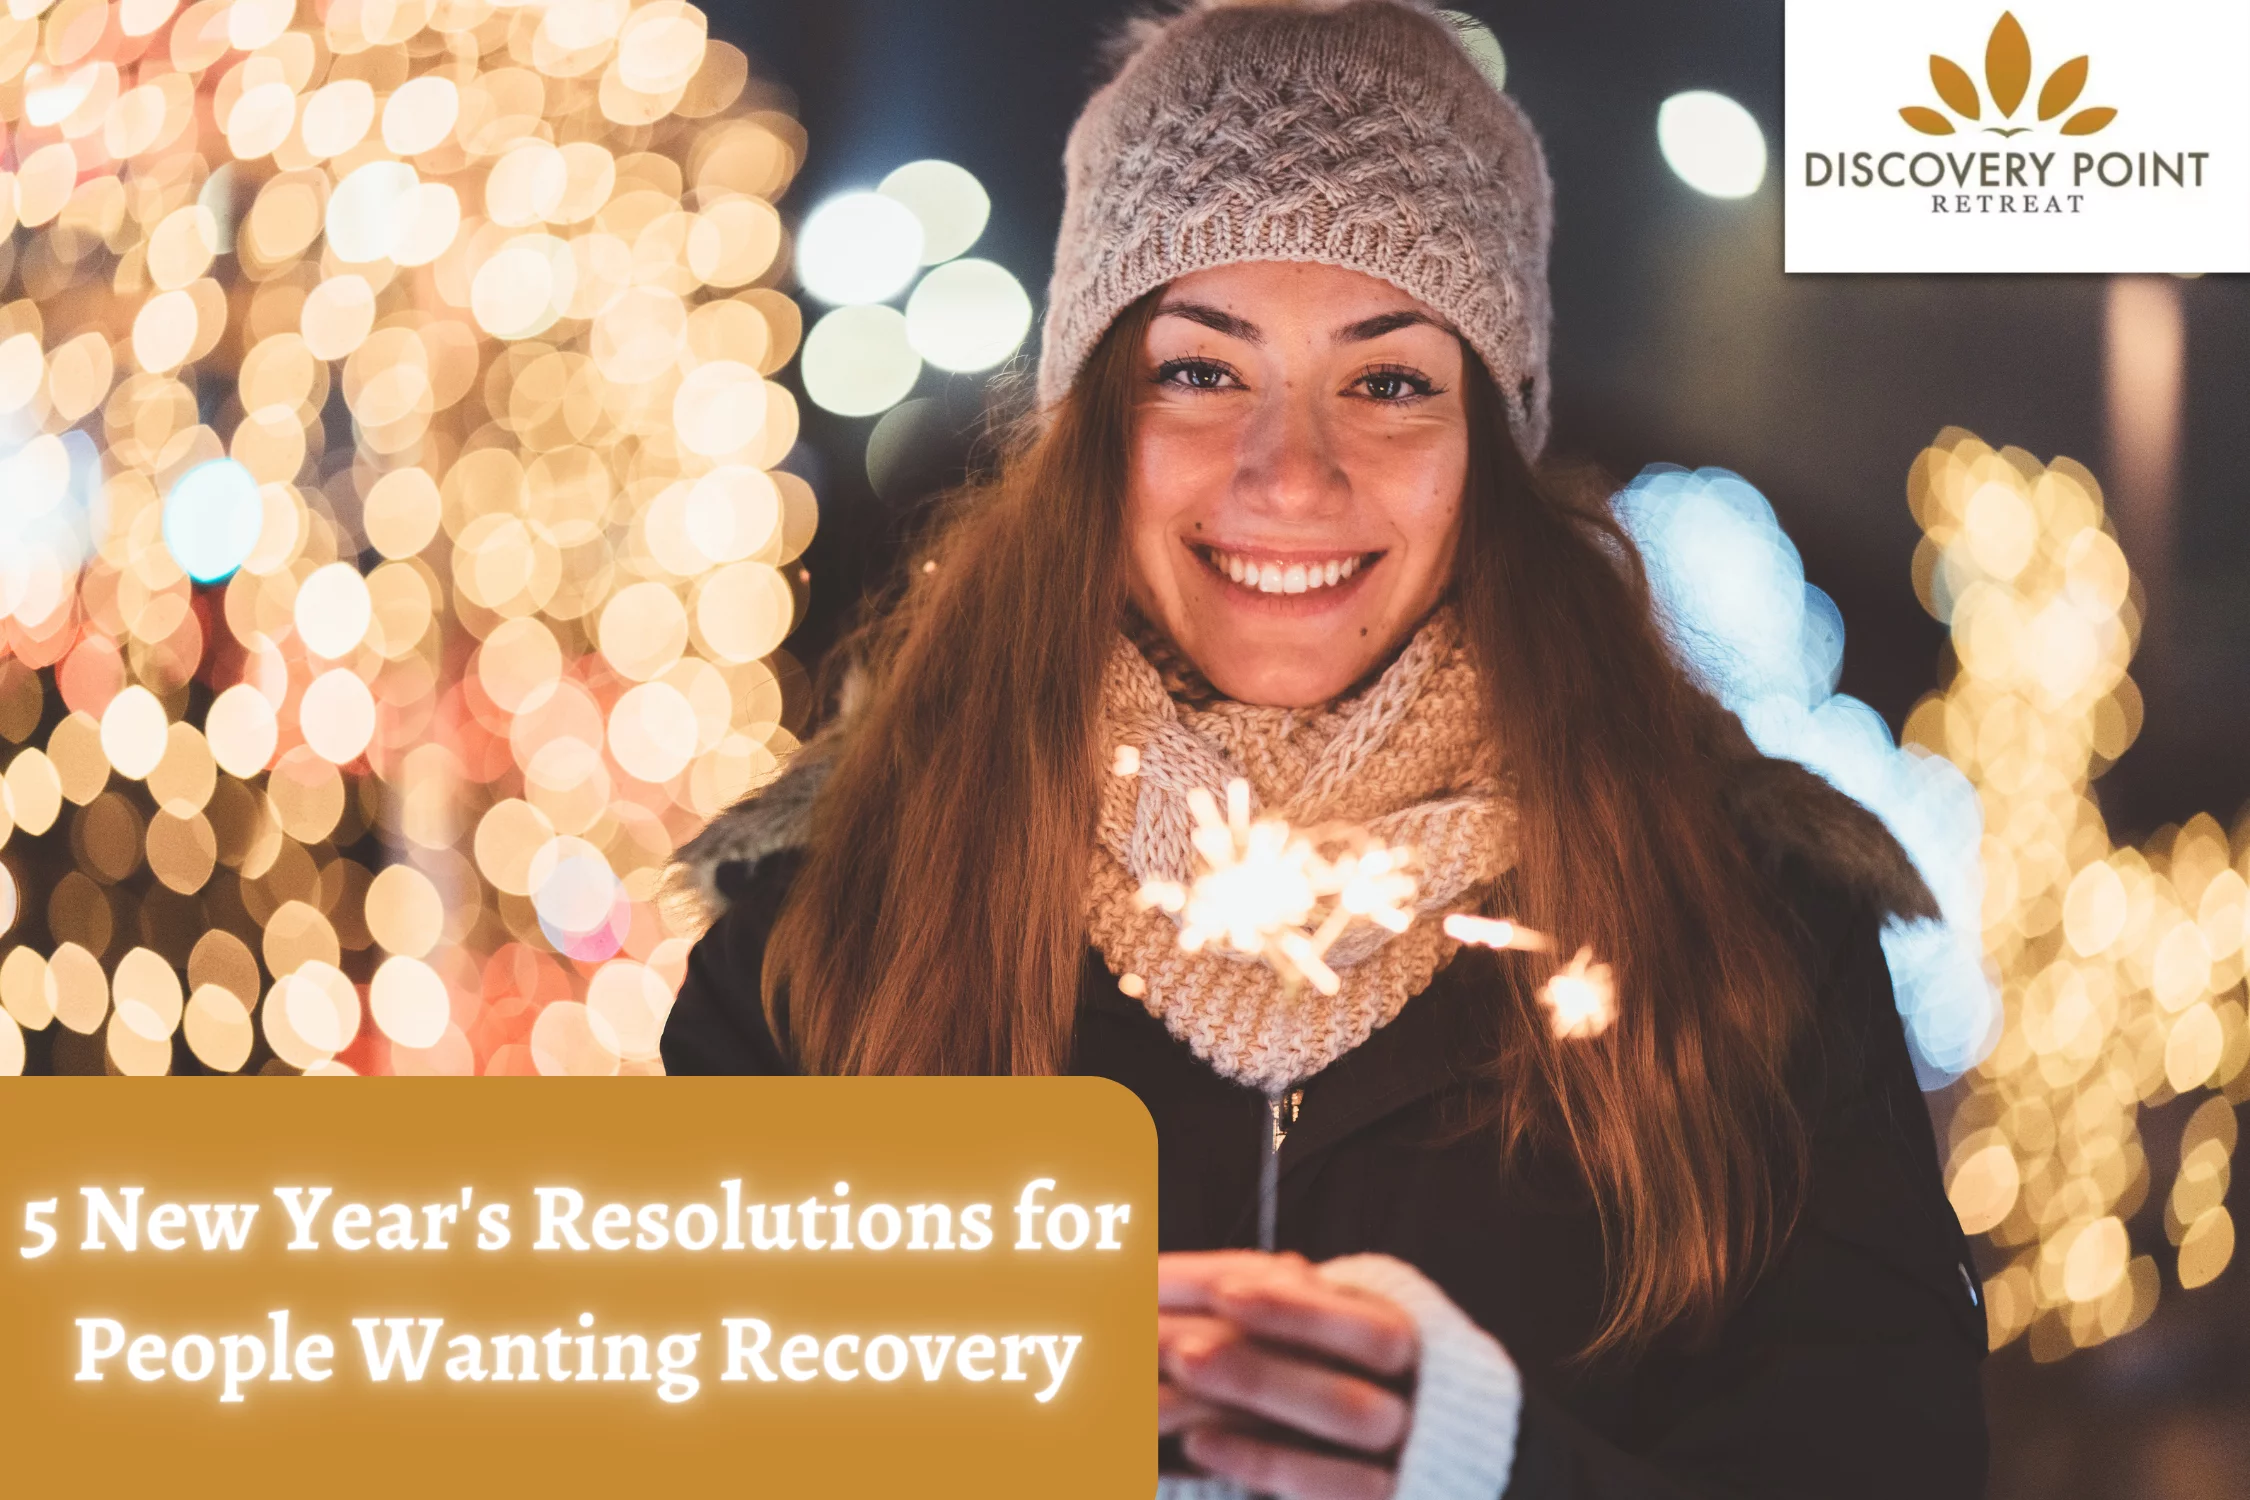 Resolutions for recovery